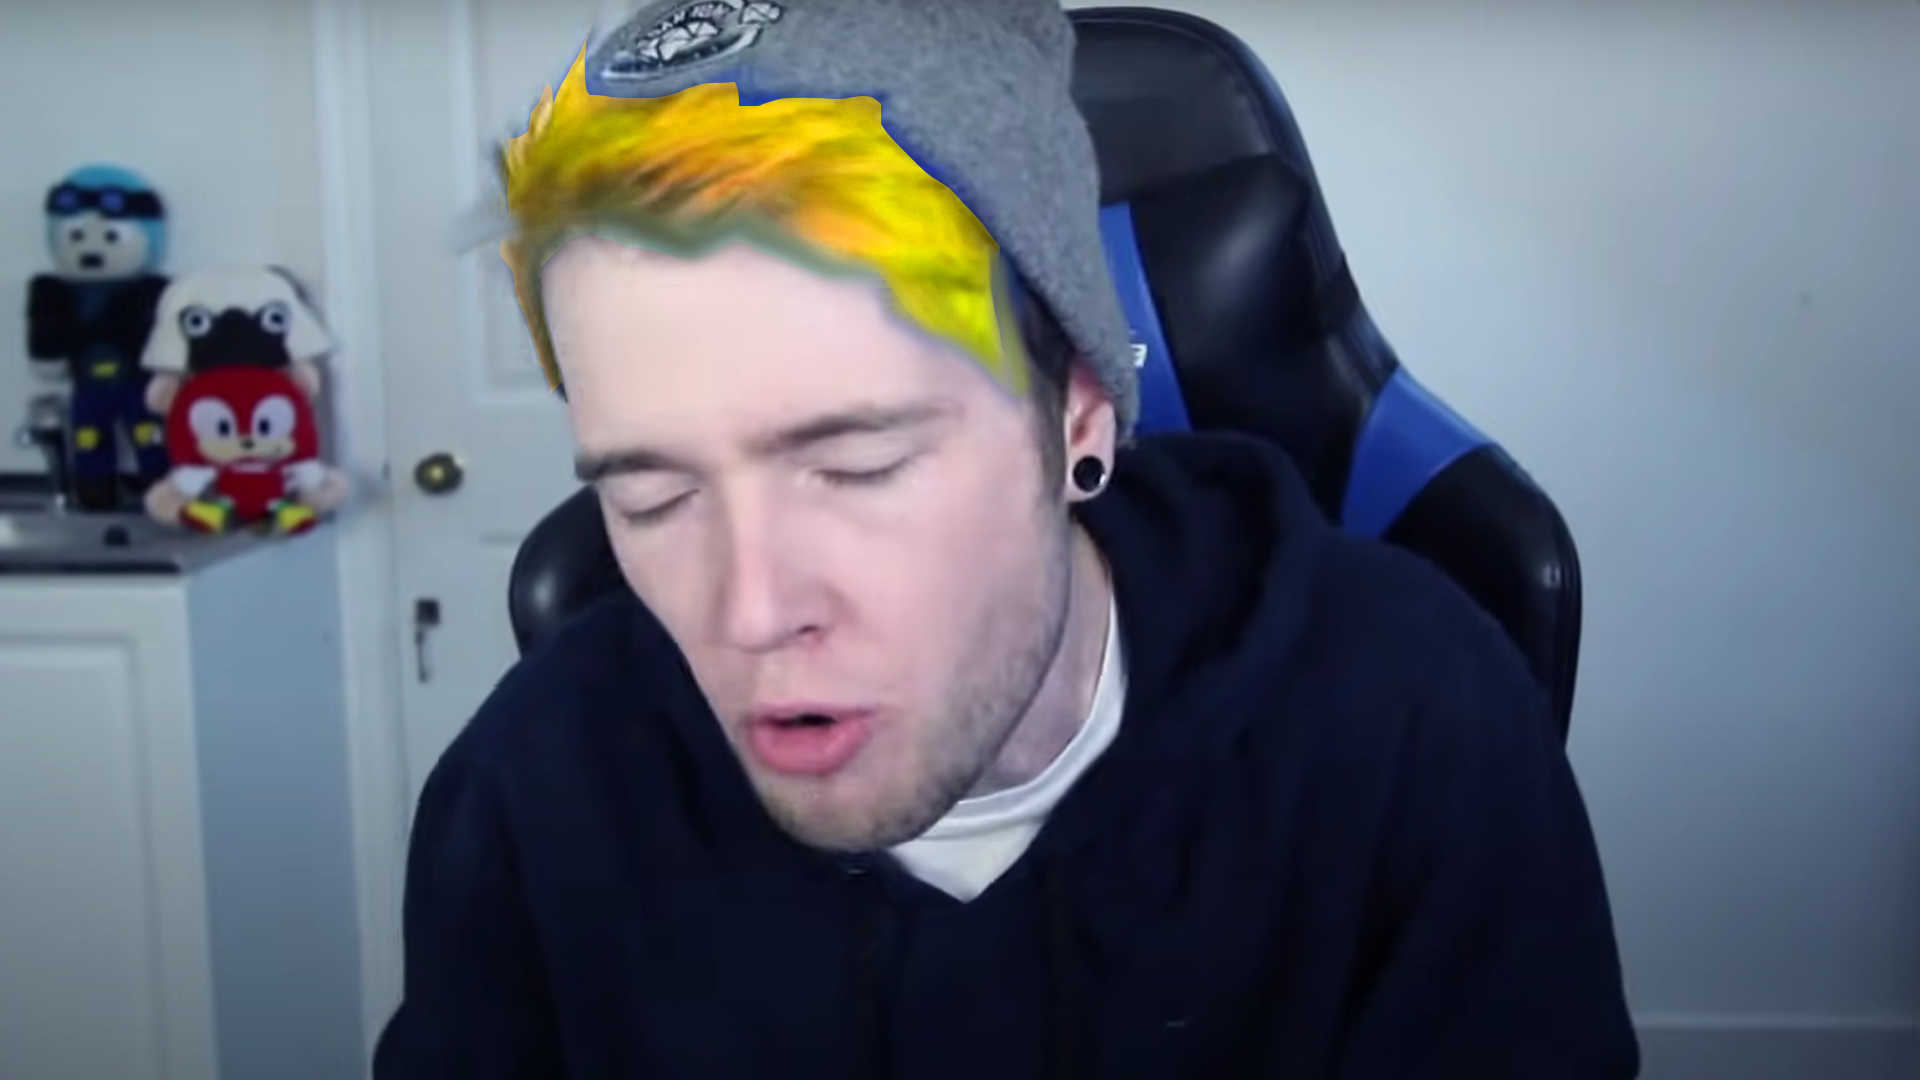 5. "Dantdm's New Look: No More Blue Hair" - wide 3